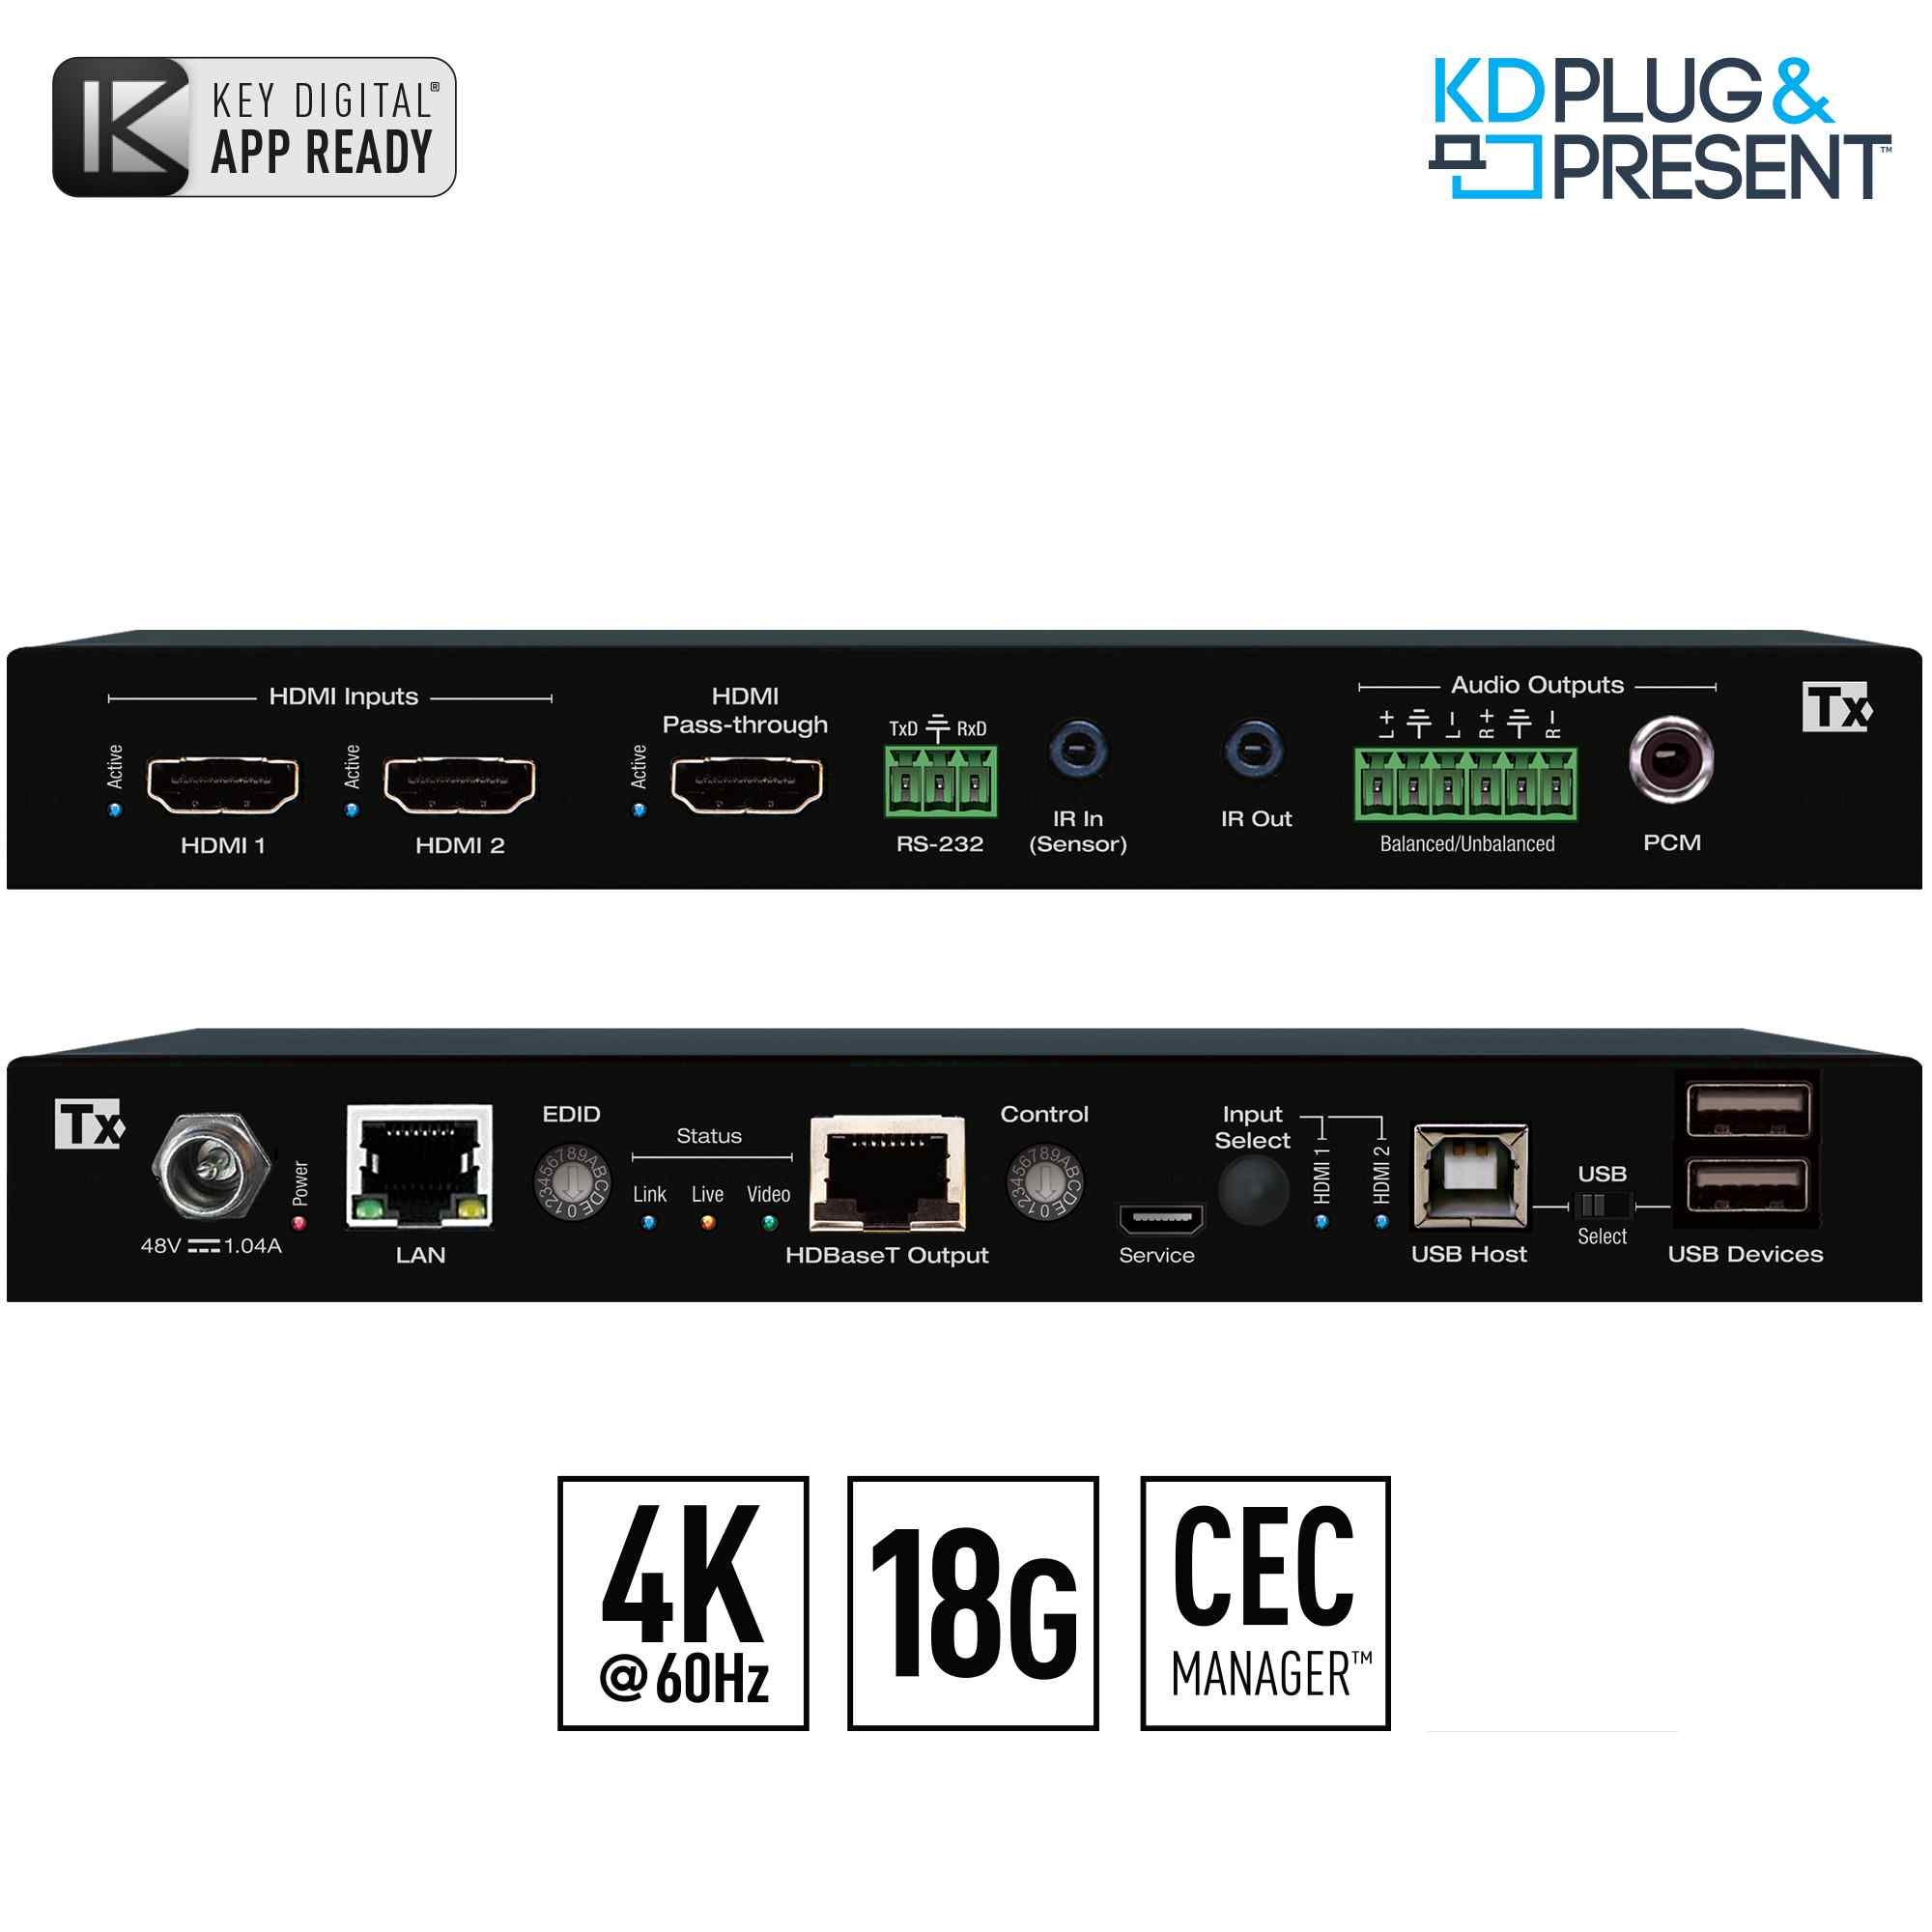 Key Digital 4K/18G 328ft (100m) HDMI over HDBaseT Extender, 2x1 Switcher with 2 HDMI Inputs, 2 Mirrored Outputs (HDBaseT, HDMI), USB 2.0, LAN, Audio De-Embed, IR, RS-232, IP Control, PoH, CEC Manager™. (Tx Only) - KD-PS22UTx